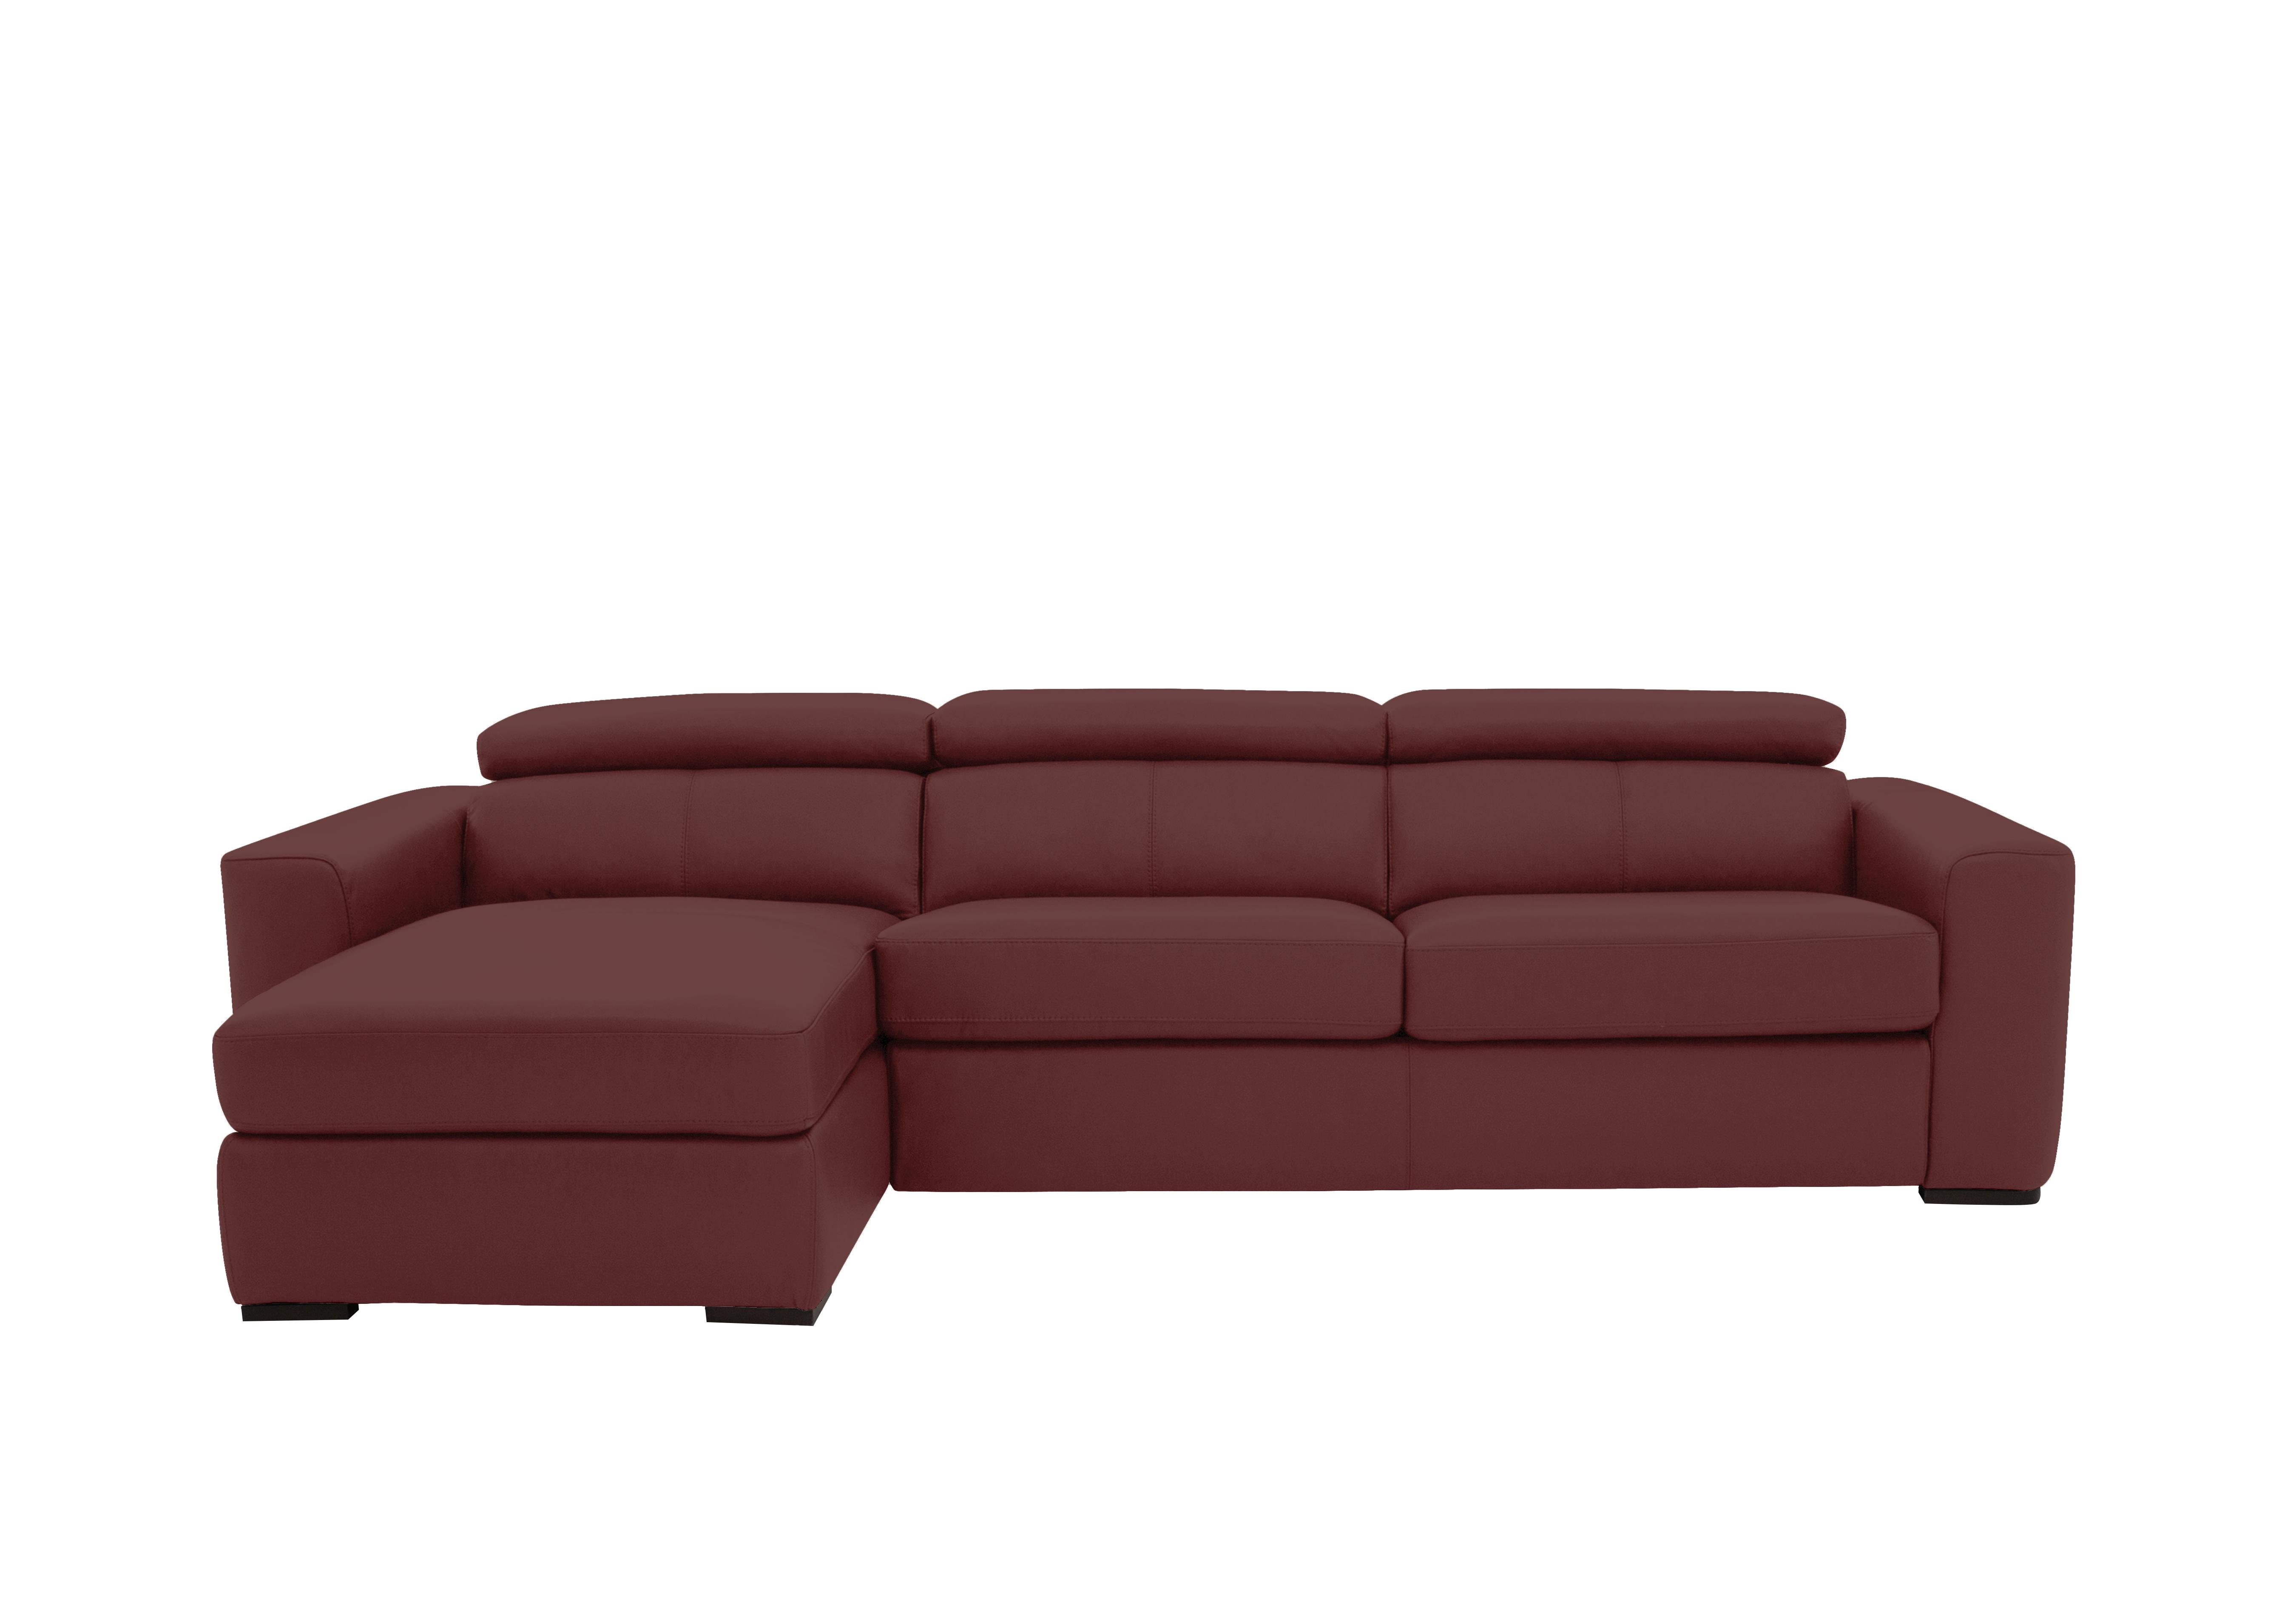 Infinity Leather Corner Chaise Sofa with Storage in Bv-035c Deep Red on Furniture Village